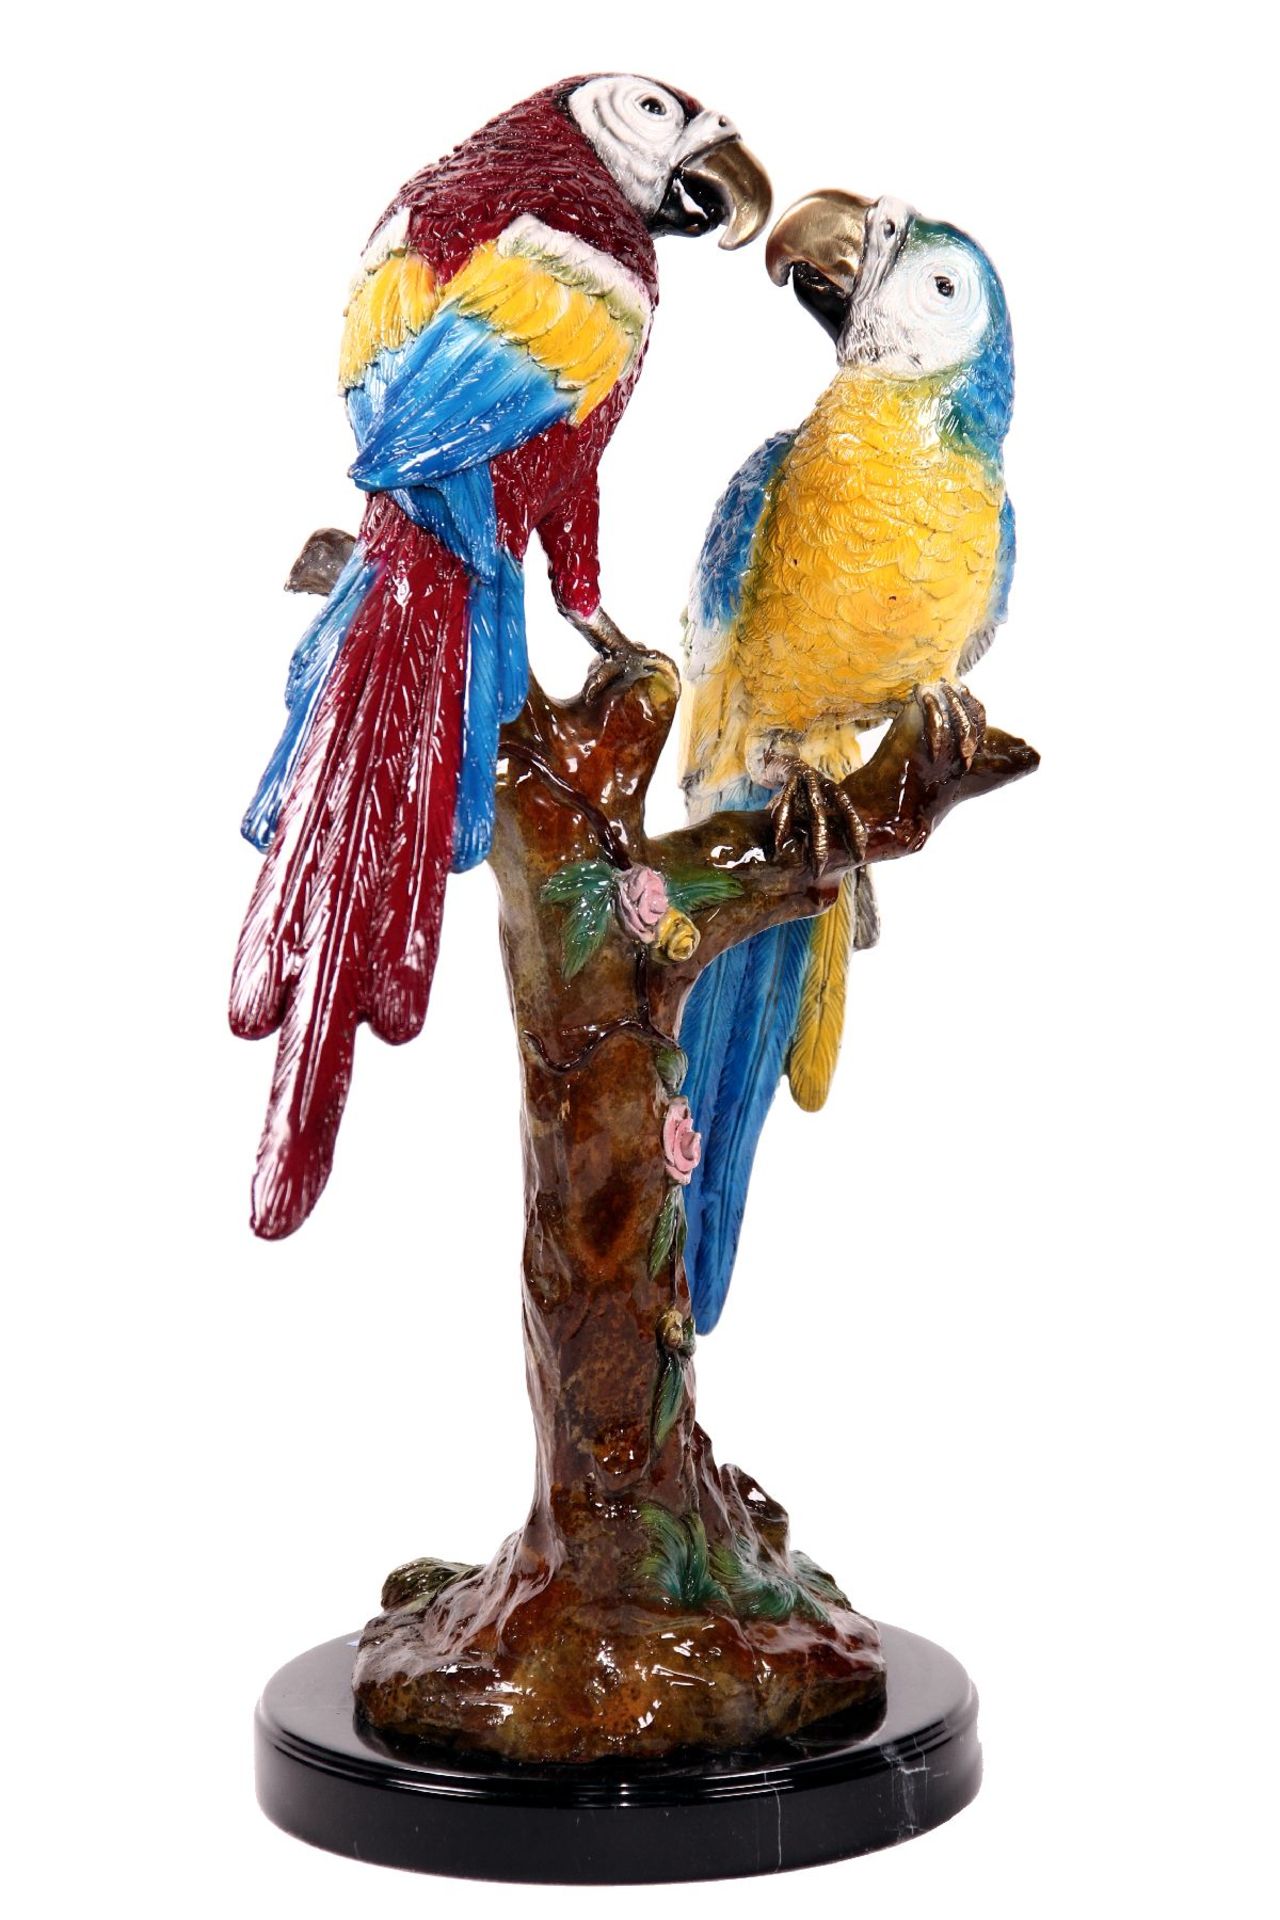 Pair of parrots on branch, bronze, brightly colored, naturalistic representation, detaileddesign, on